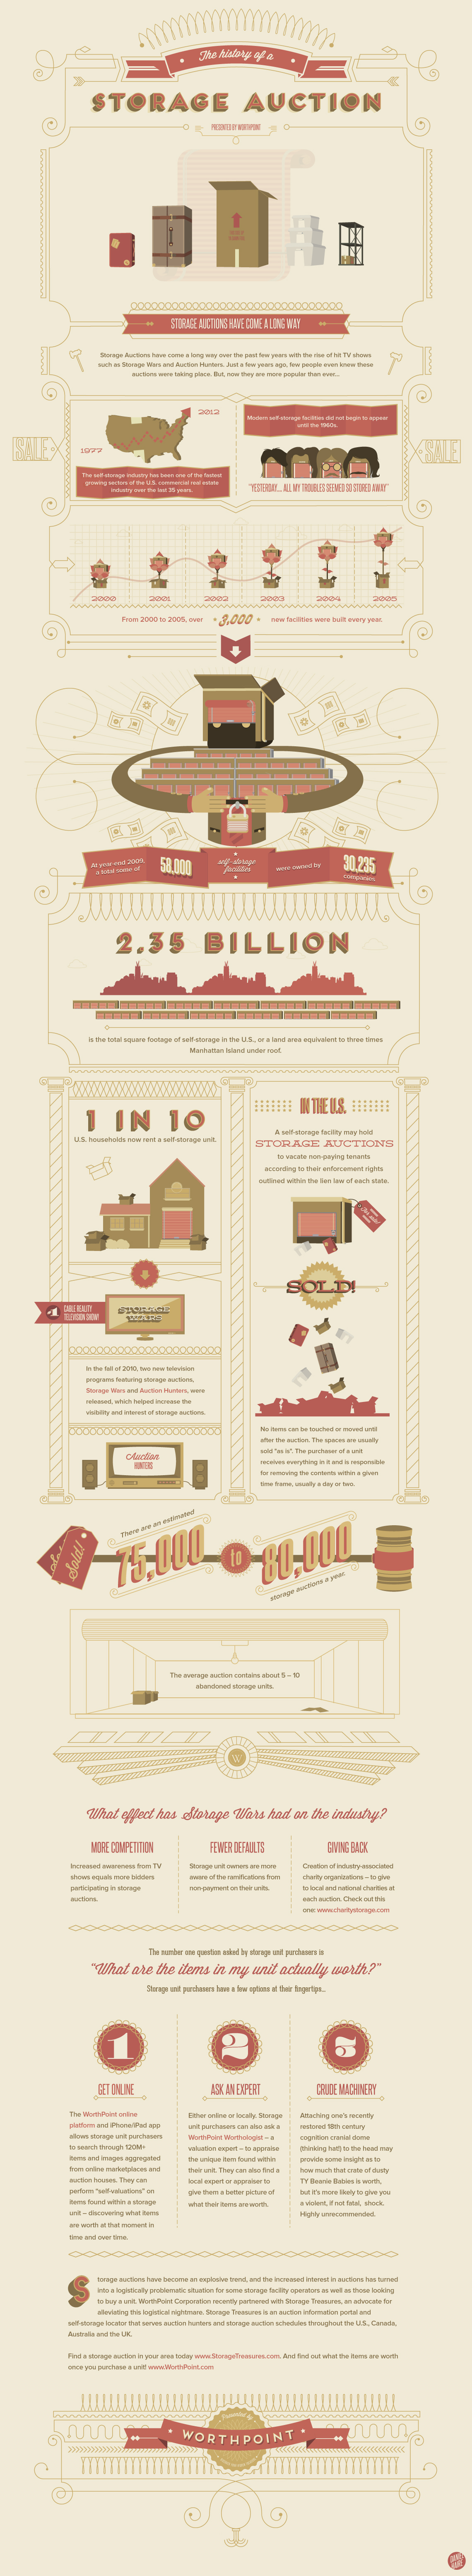 INFOGRAPHIC: The History of a Storage Auction